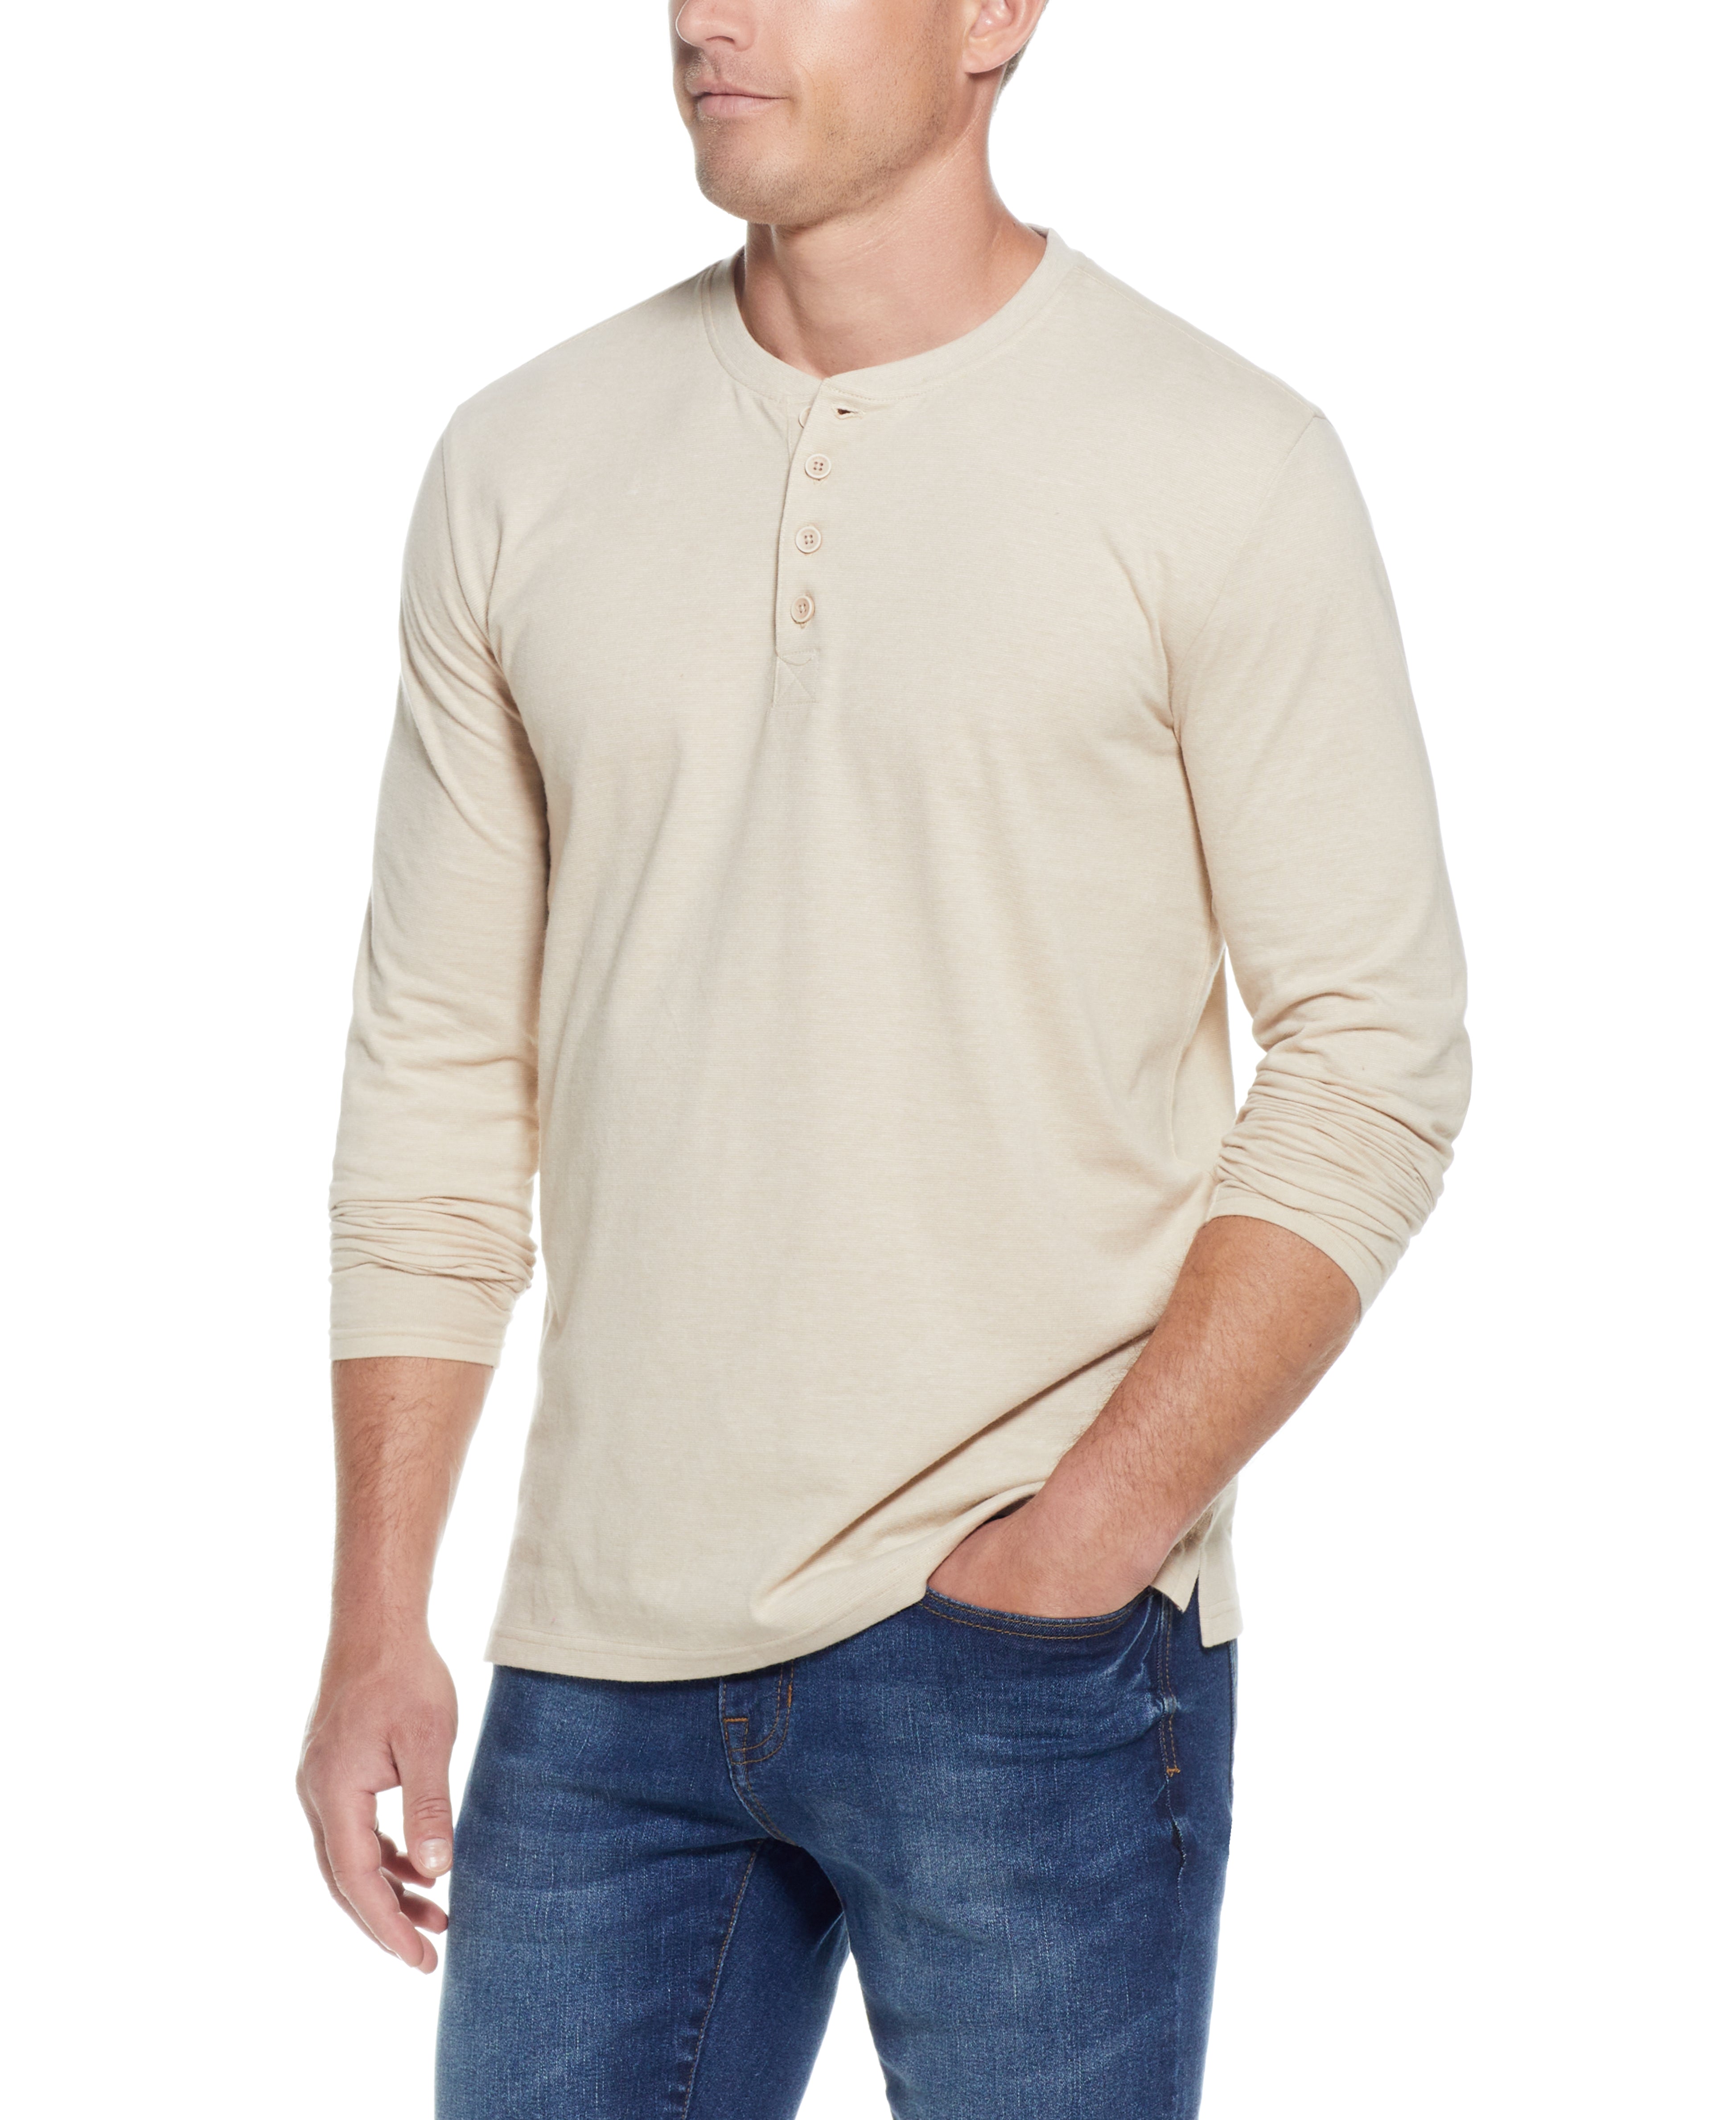 L/S SUEDED MICROSTRIPE  HENLEY in NATURAL